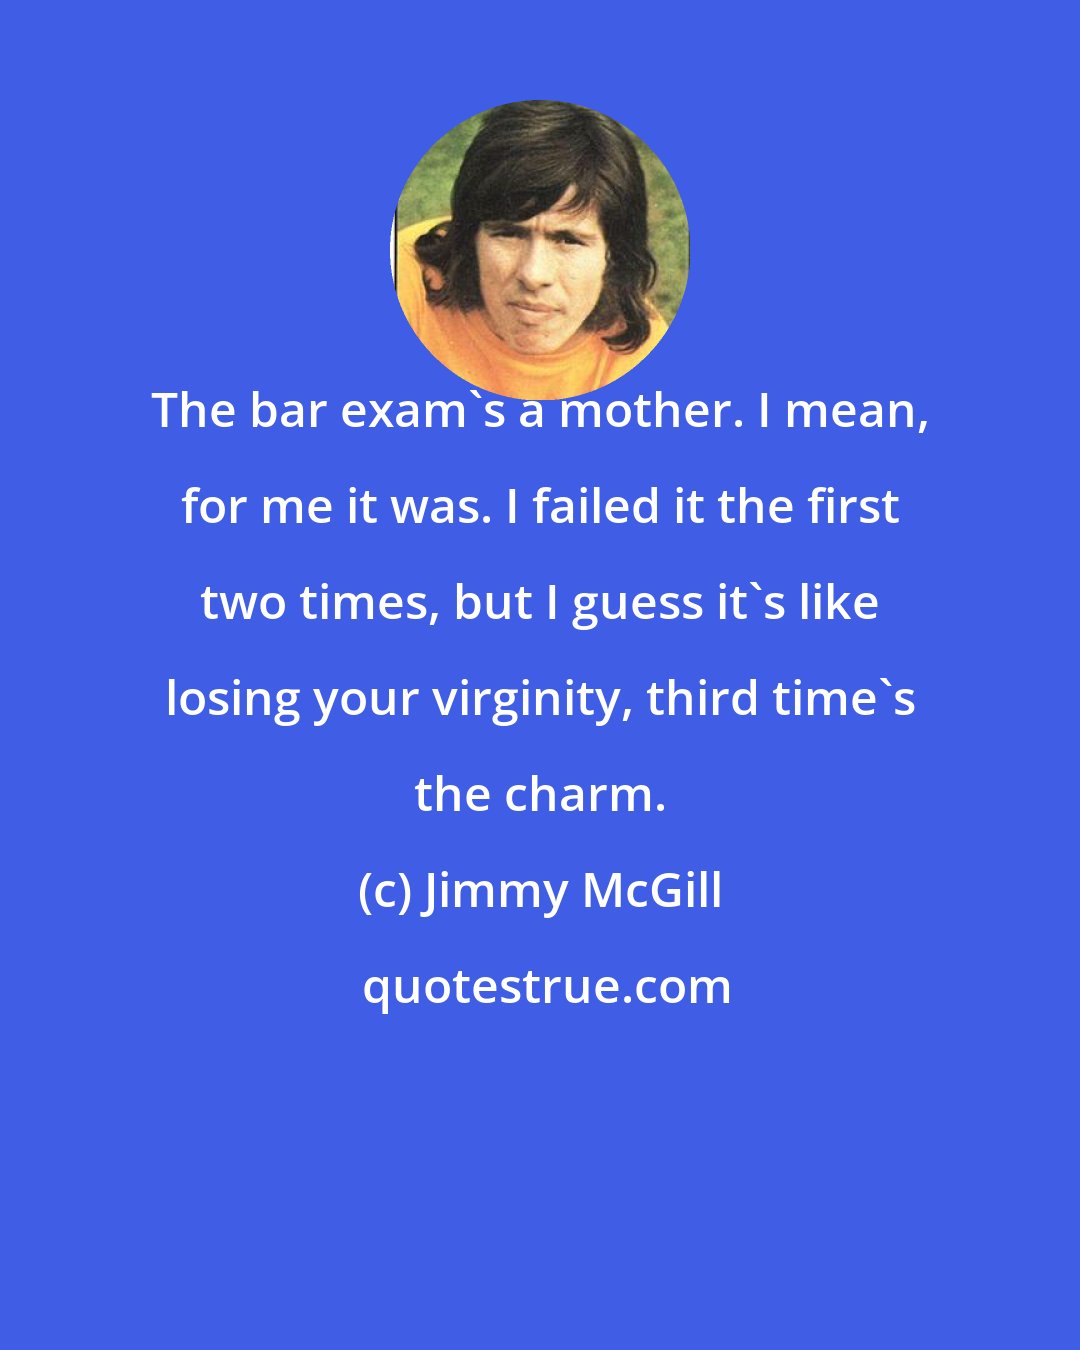 Jimmy McGill: The bar exam's a mother. I mean, for me it was. I failed it the first two times, but I guess it's like losing your virginity, third time's the charm.